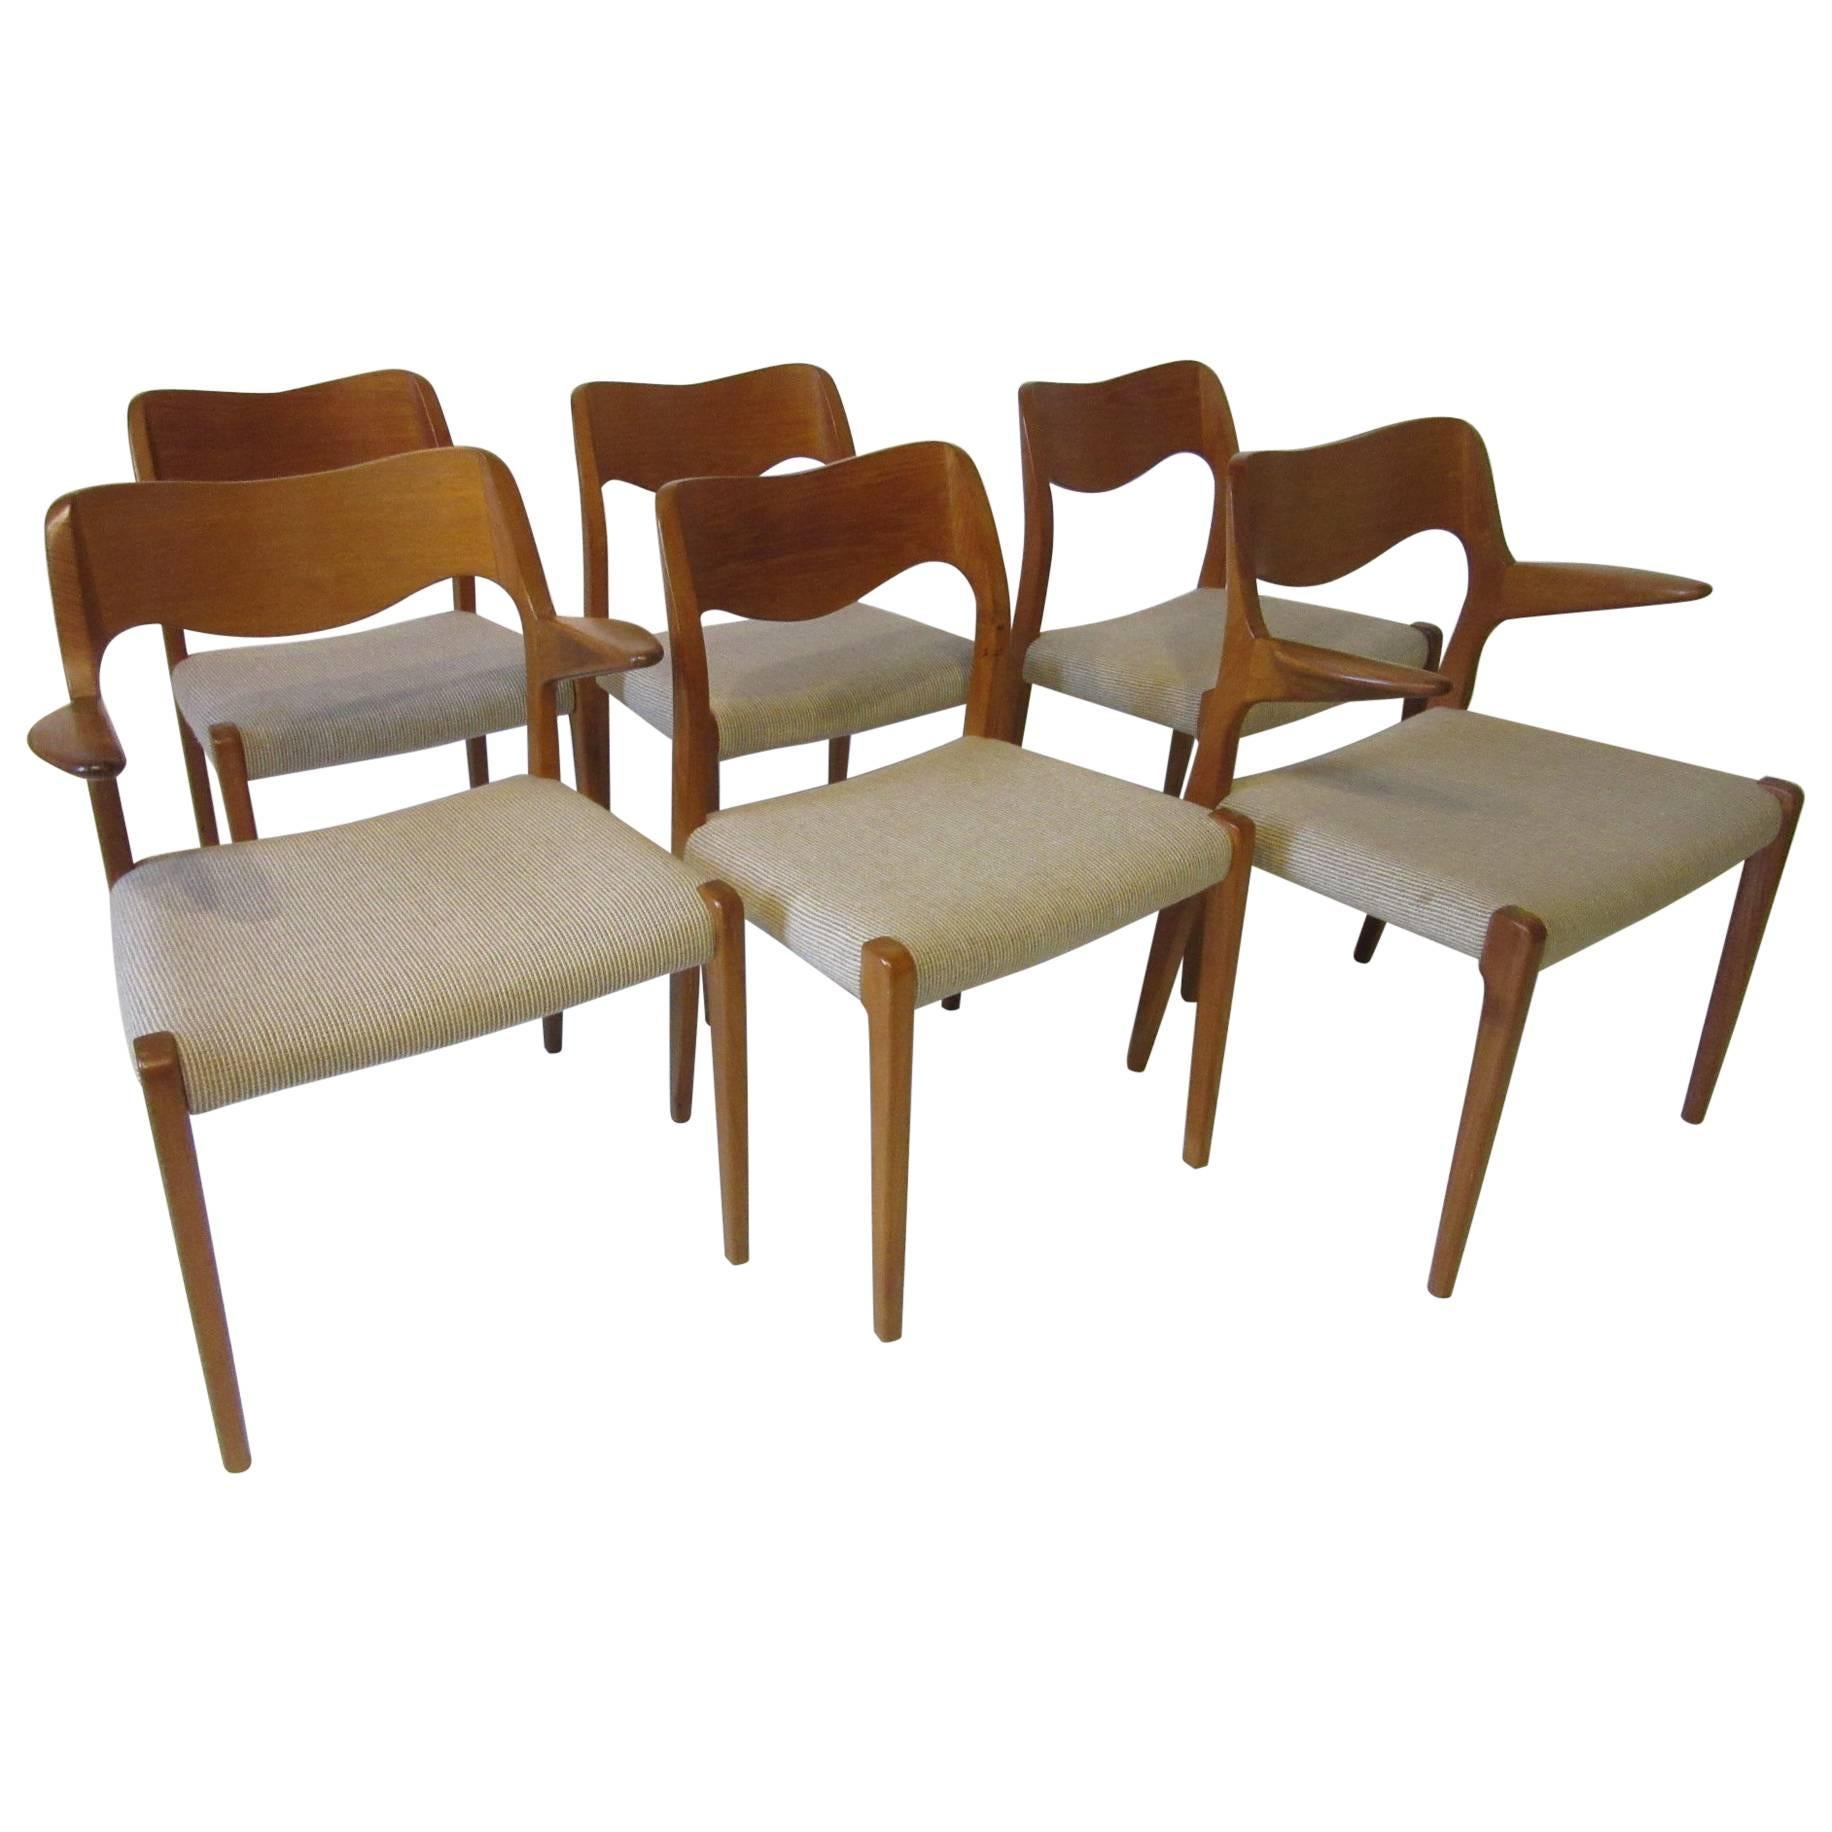 Six Danish Teak Dining Chairs by Niels Otto Moller for J.L. Moller